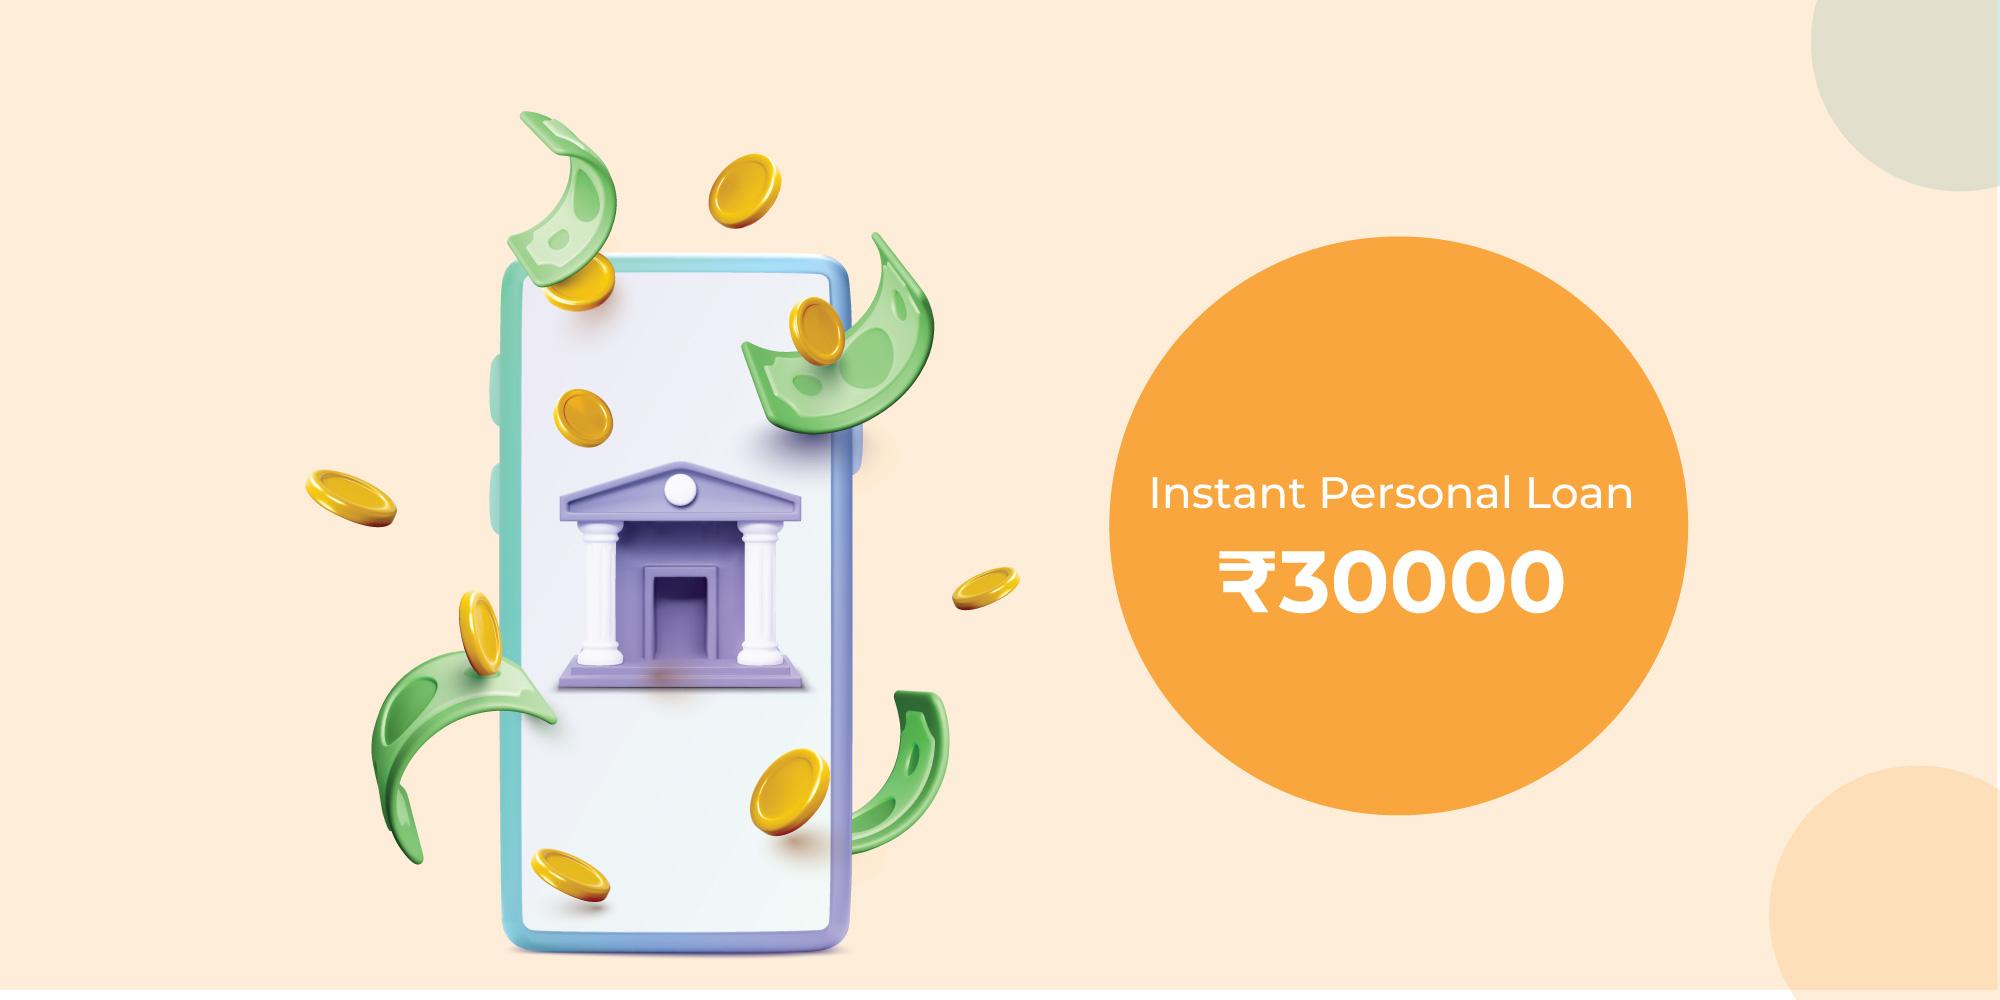 How to Get Instant Personal Loan of ₹30,000: Easy Steps to Follow